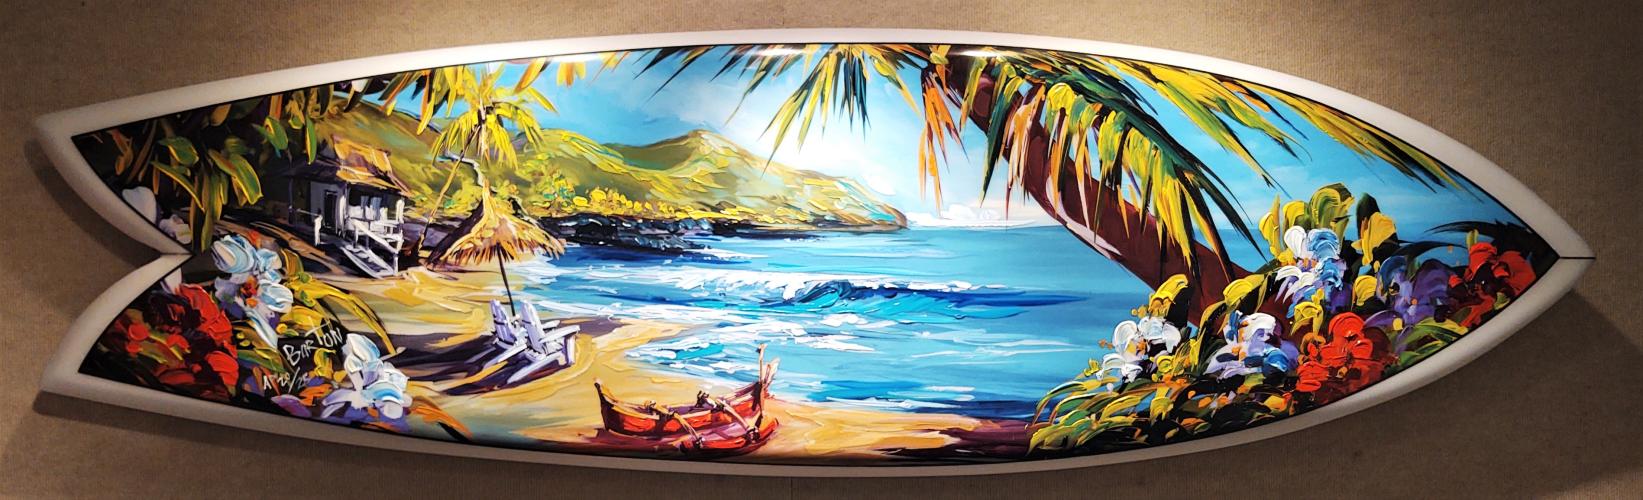 <b>*NEW*</b> Captured in Time 21x72 Surfboard Giclee #20/25 SOLD OUT EDITION by Steve Barton